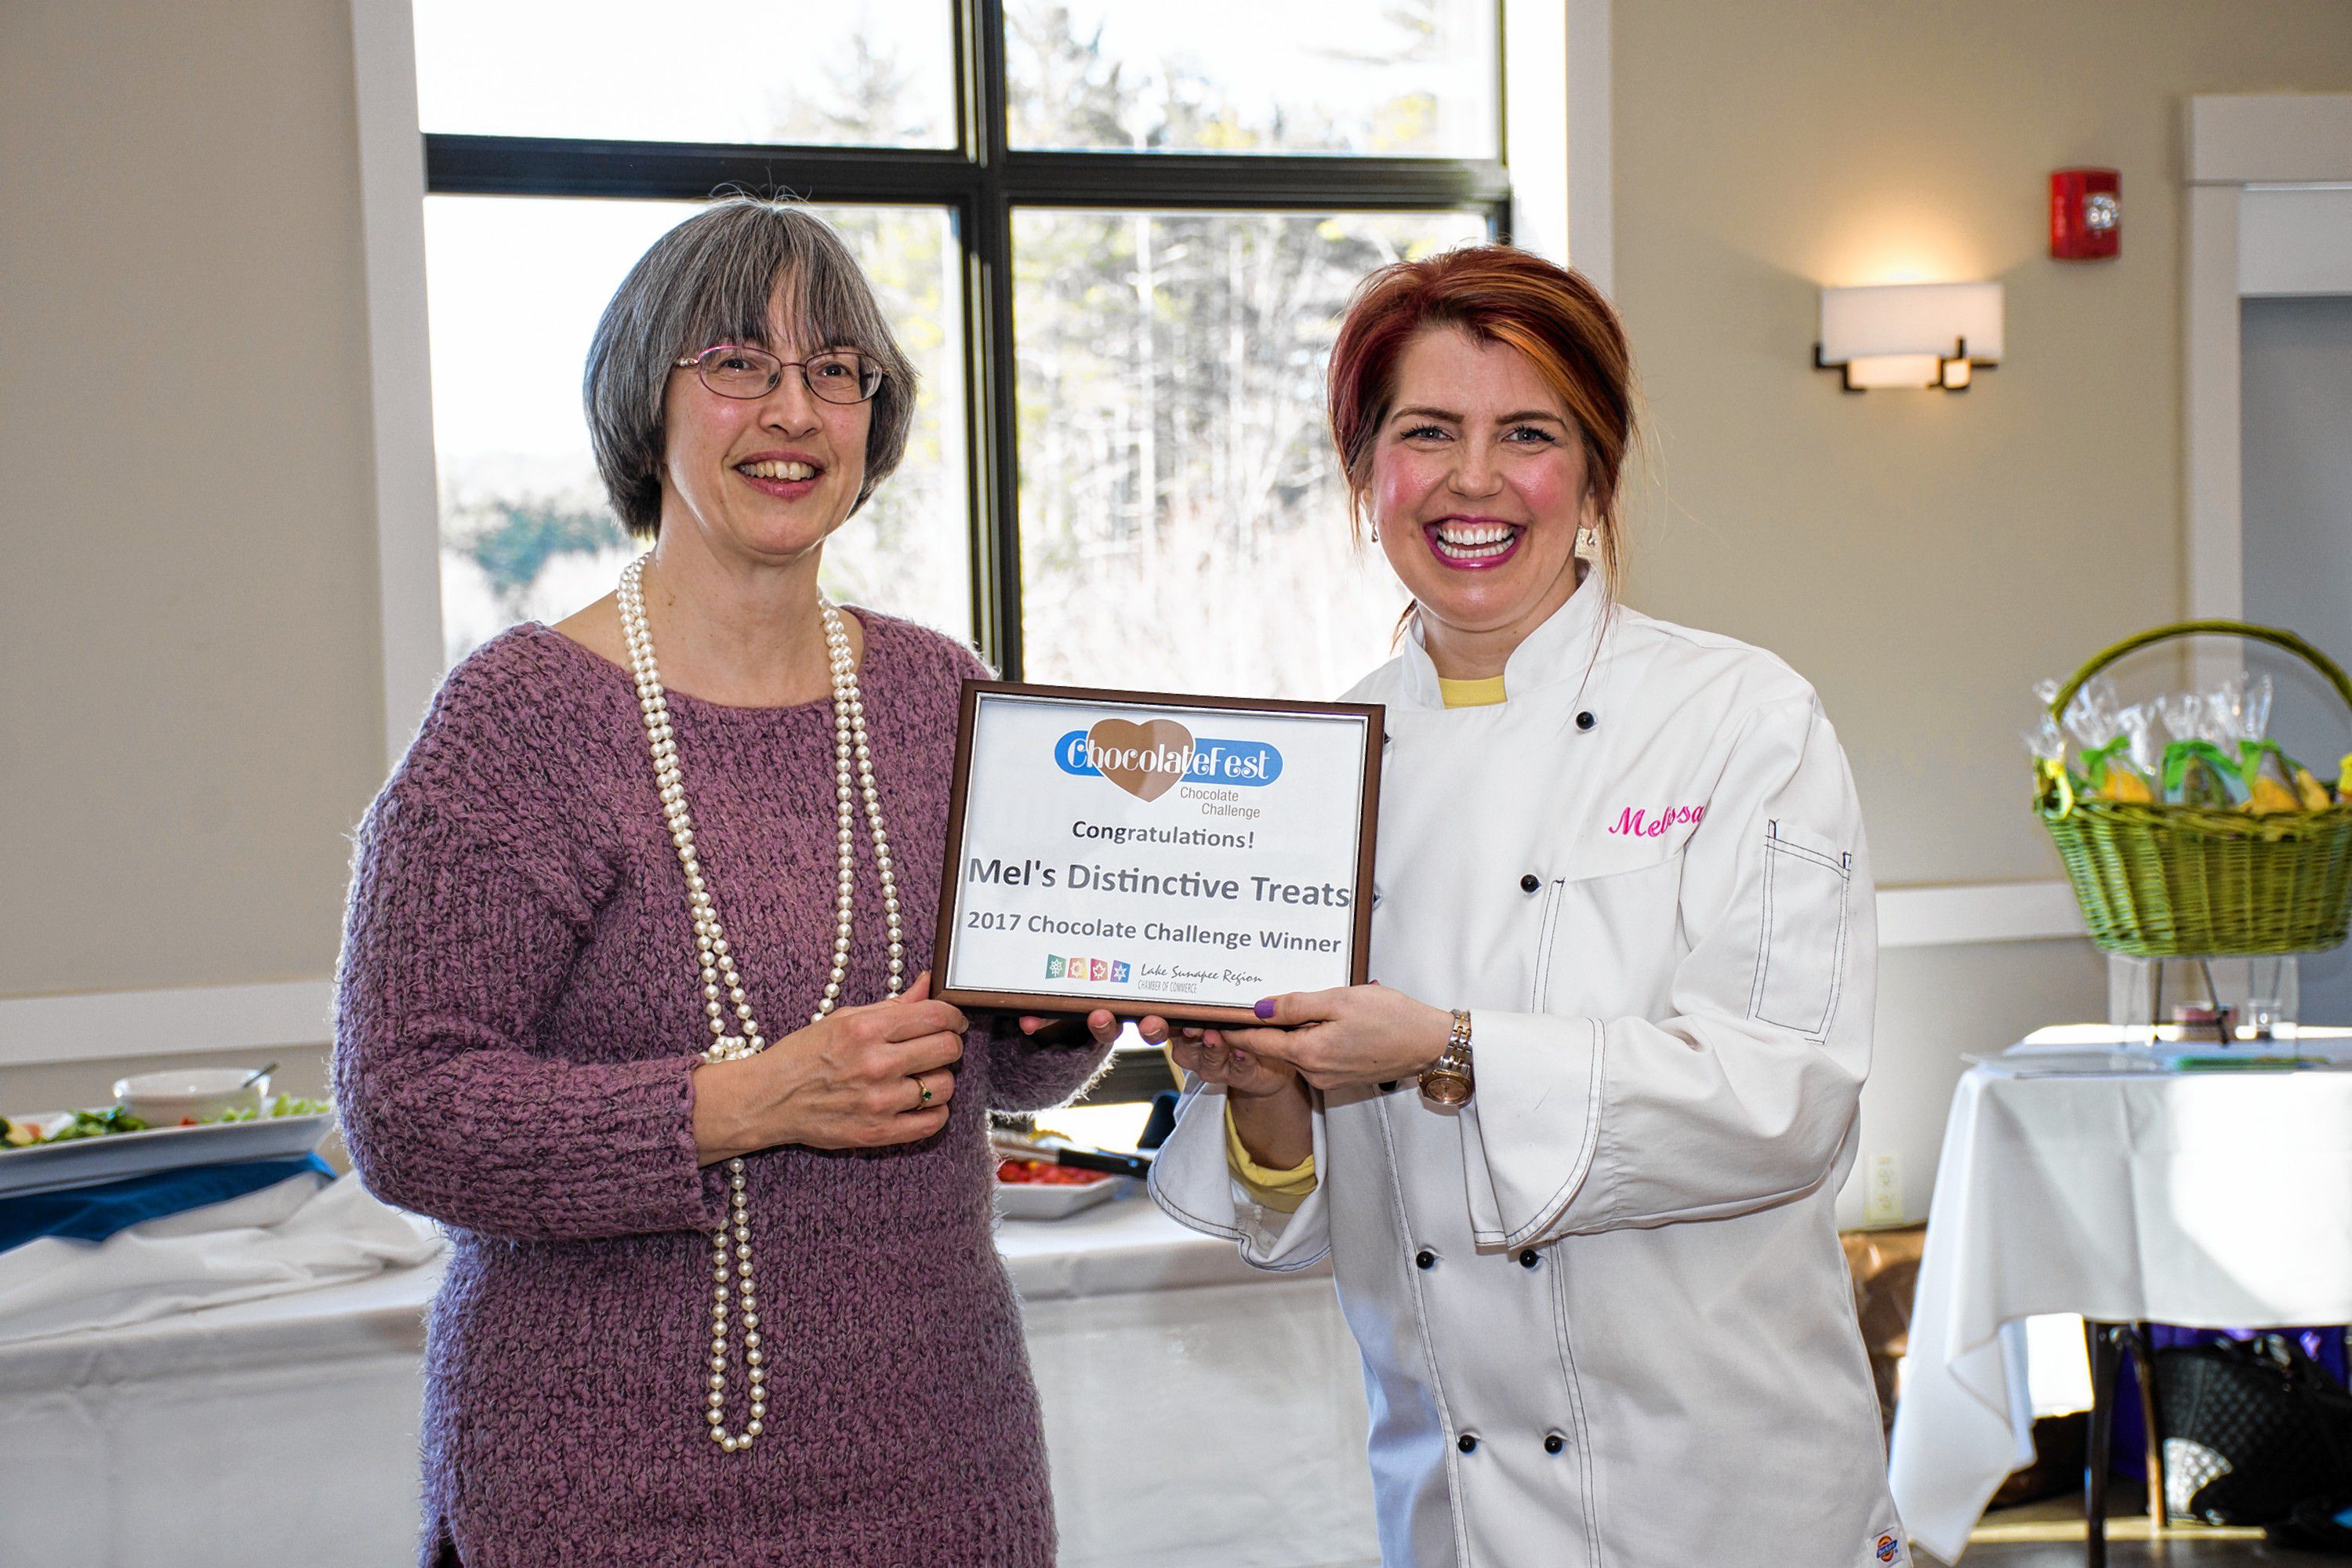 With the votes tallied, Lorie McClory, left, marketing and communications director of Eastman and co-chair of ChocolateFest announces Mel's Distinctive Treats as the 2017 Winner of the Chocolate Challenge. Nancy Nutile-McMenemy photograph